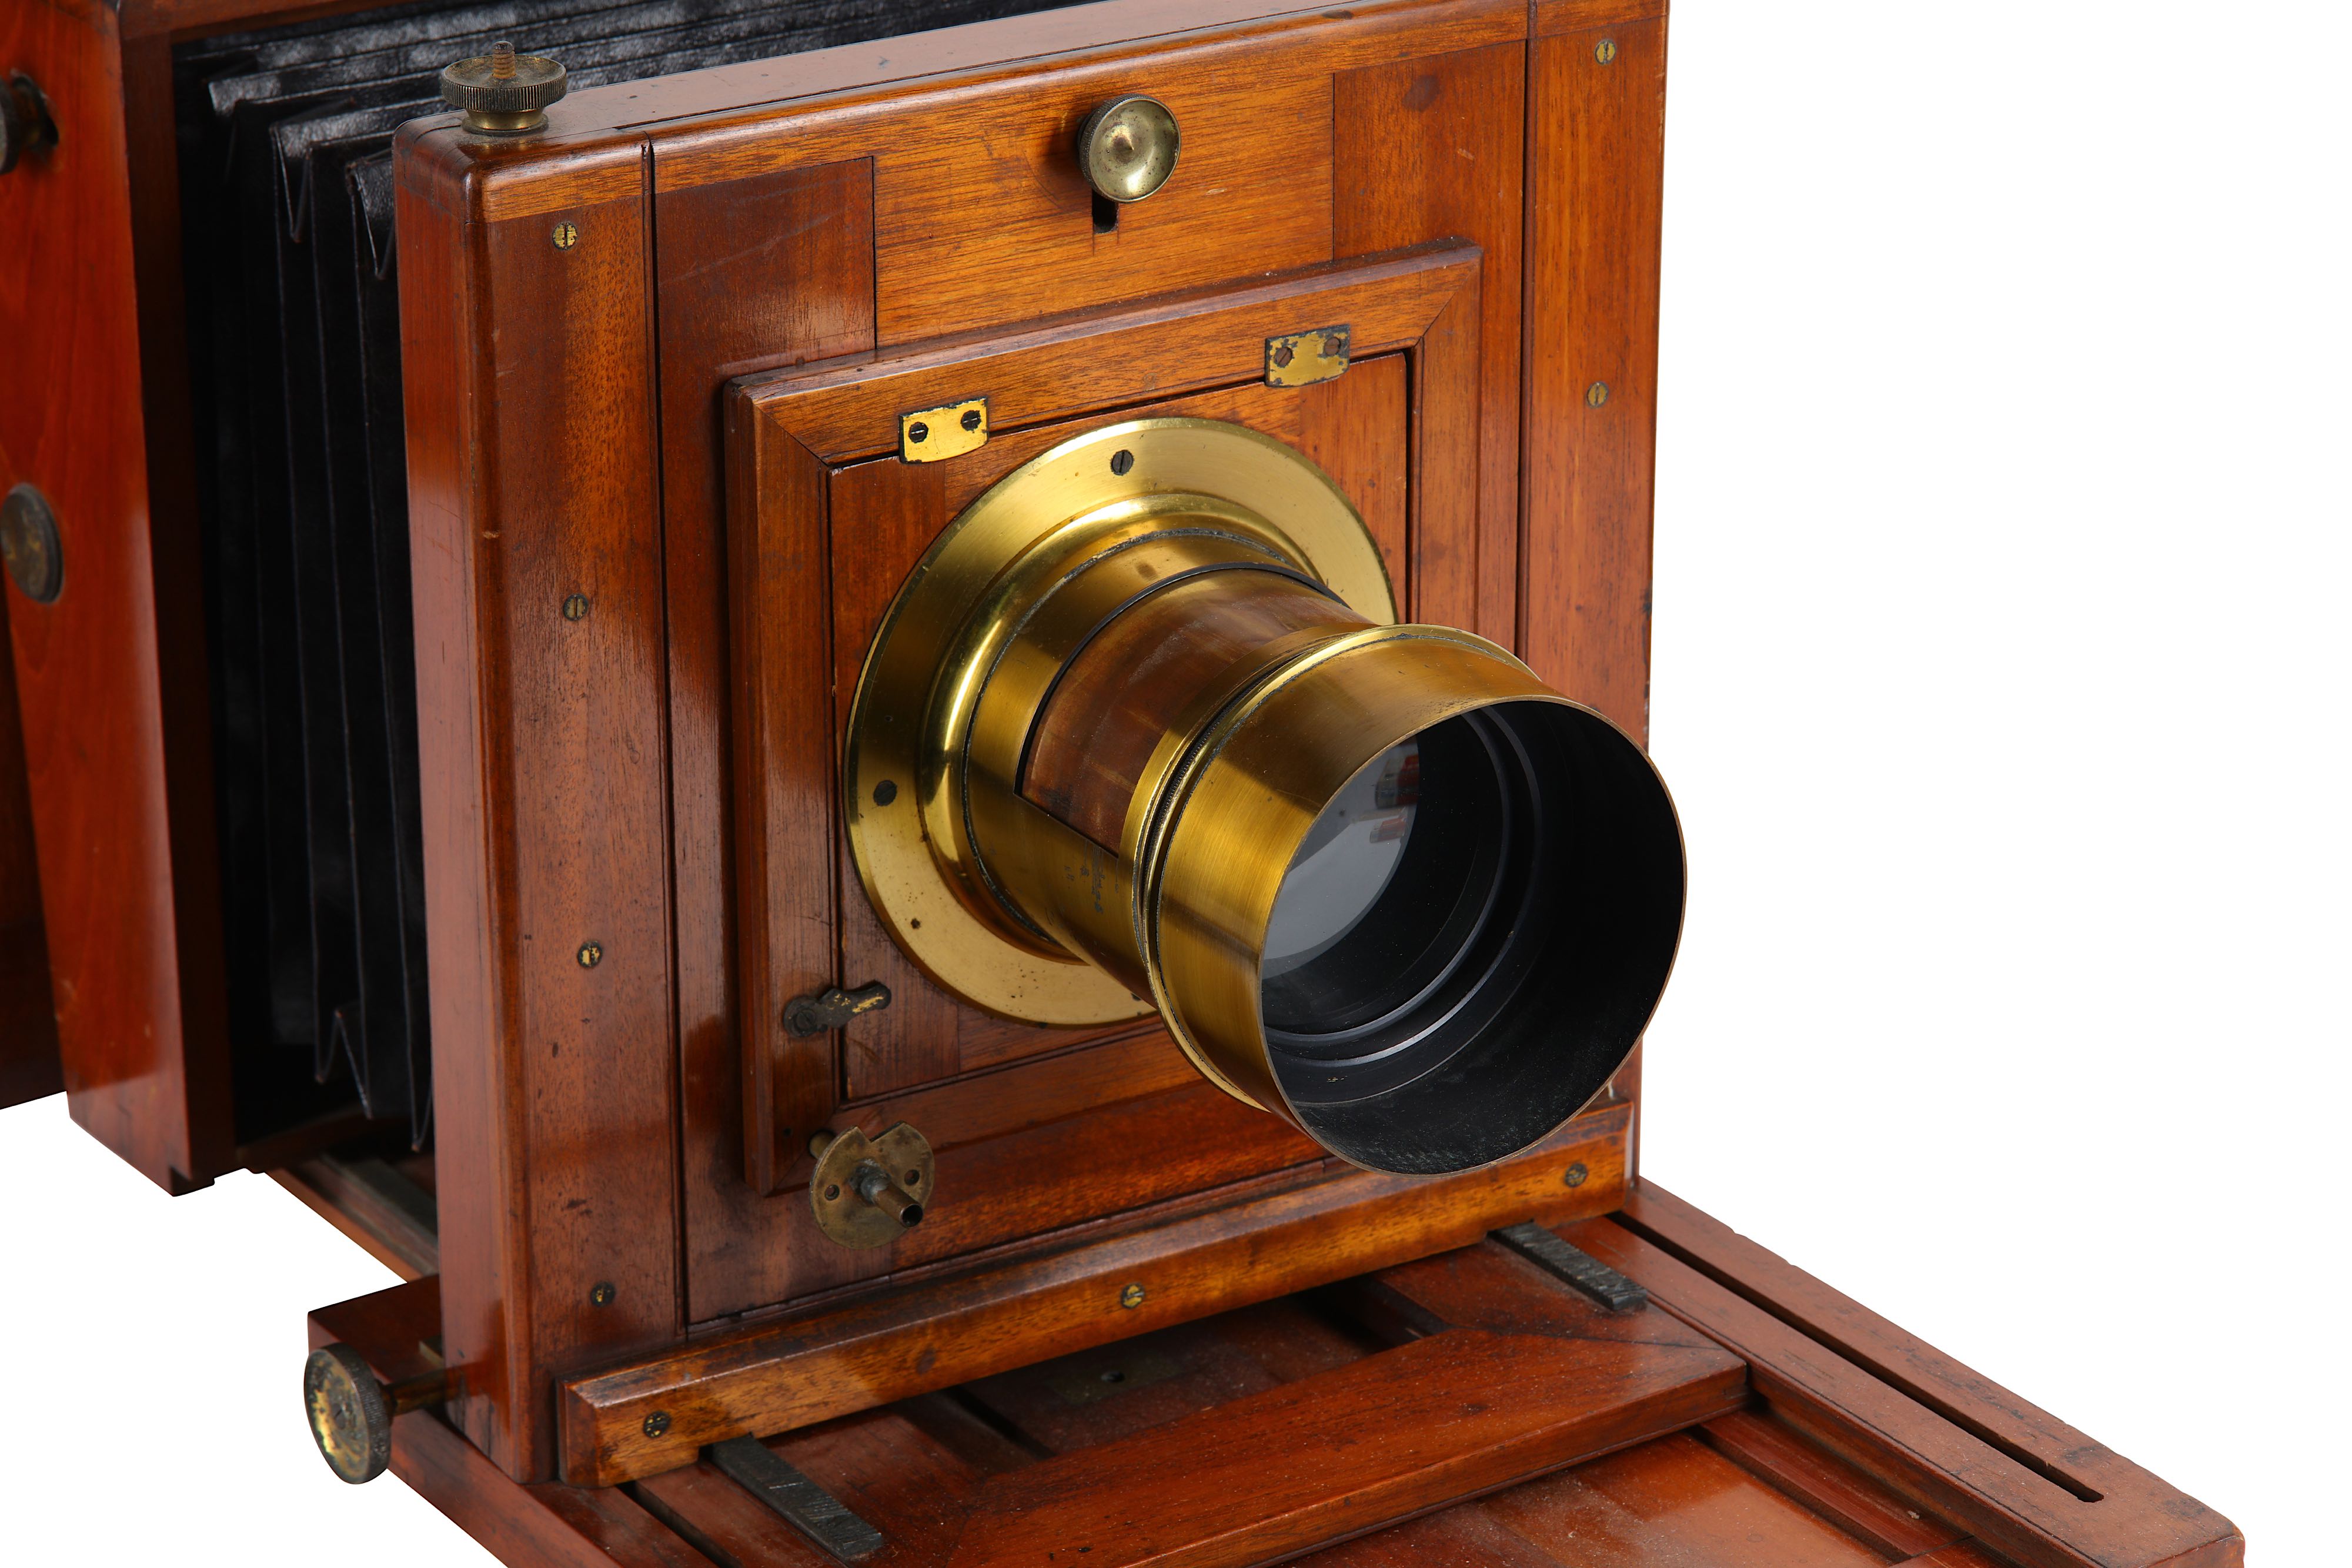 A Whole Plate Mahogany Studio Camera with Anachromatic Brass Lens - Image 5 of 6